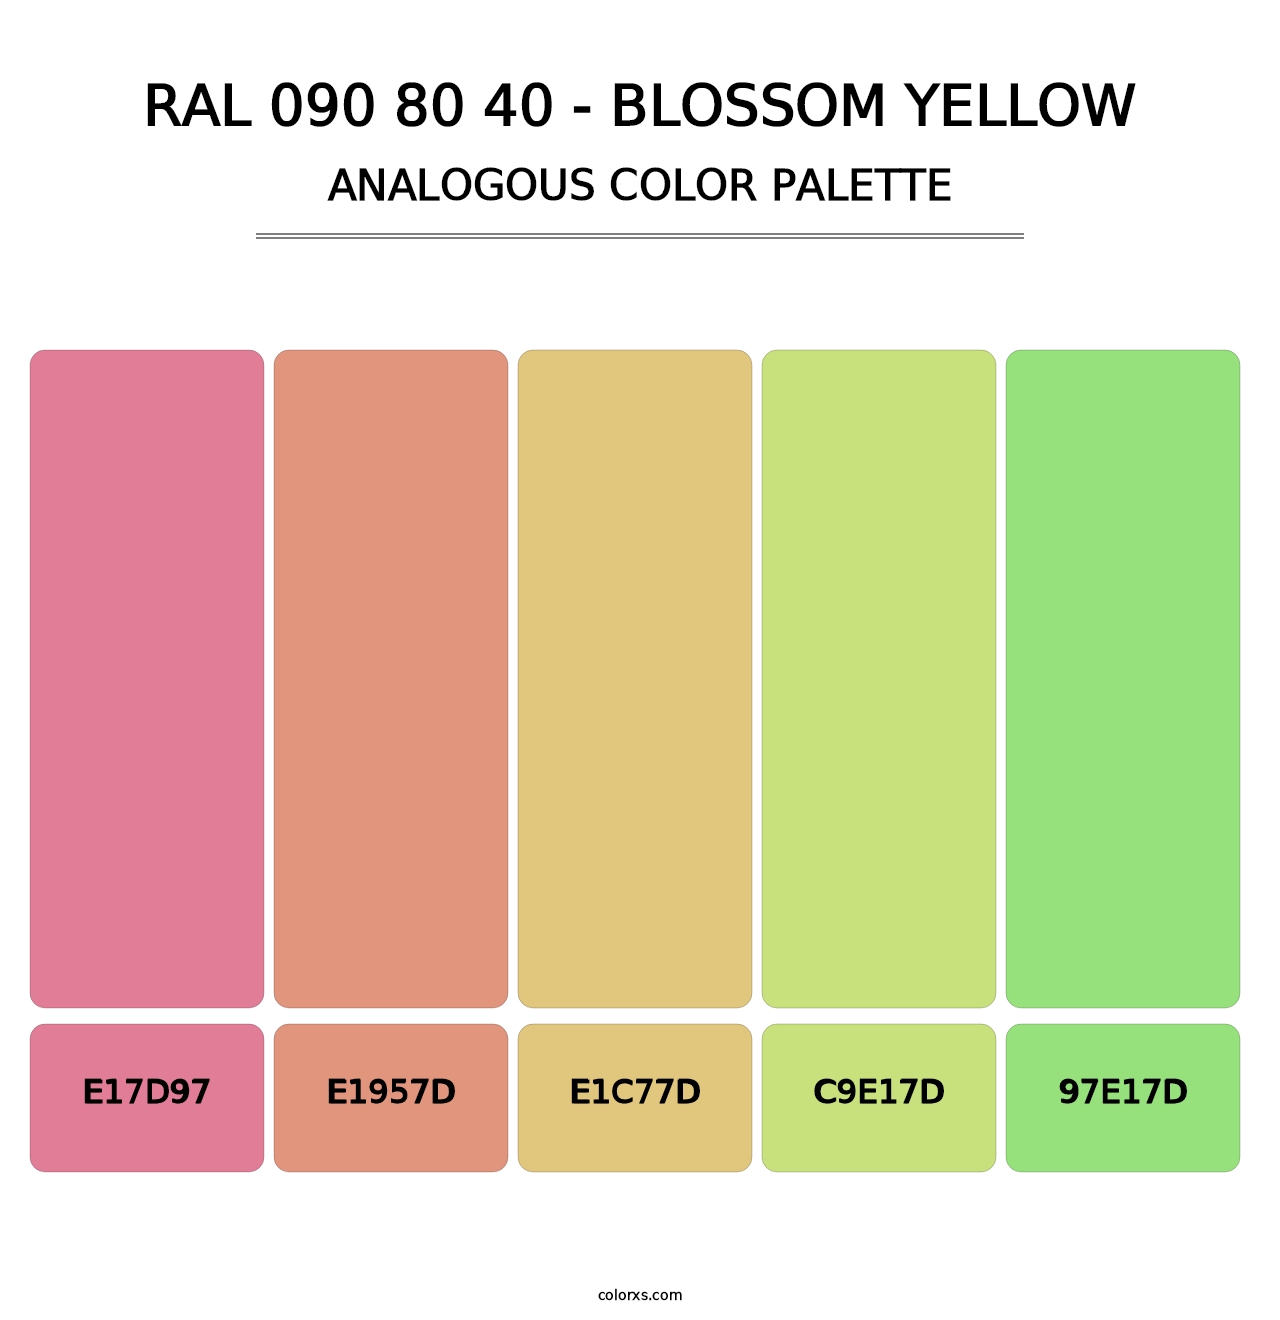 RAL 090 80 40 - Blossom Yellow - Analogous Color Palette